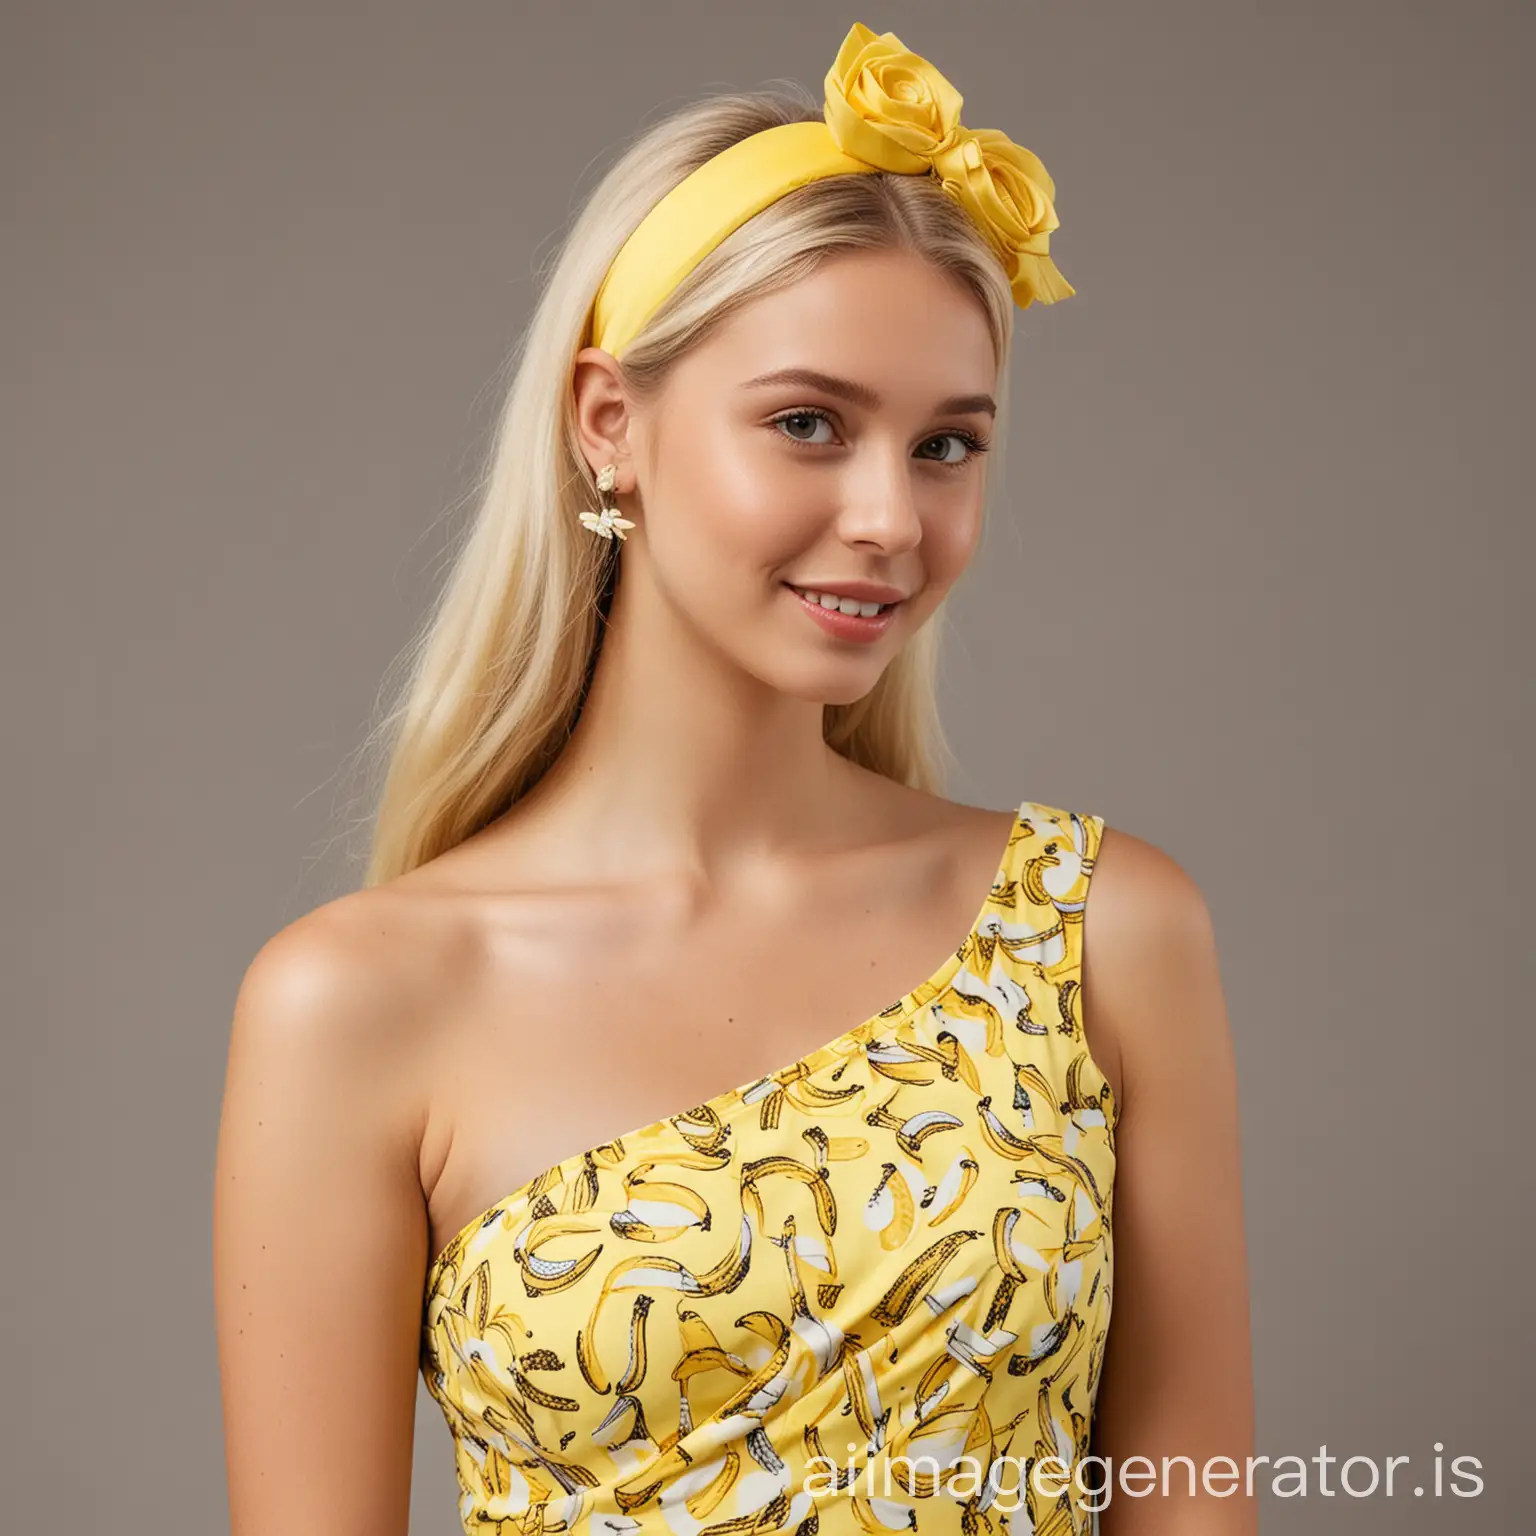 Blonde-Girl-in-Stylish-BananaInspired-OneShoulder-Dress-with-Hair-Accessories